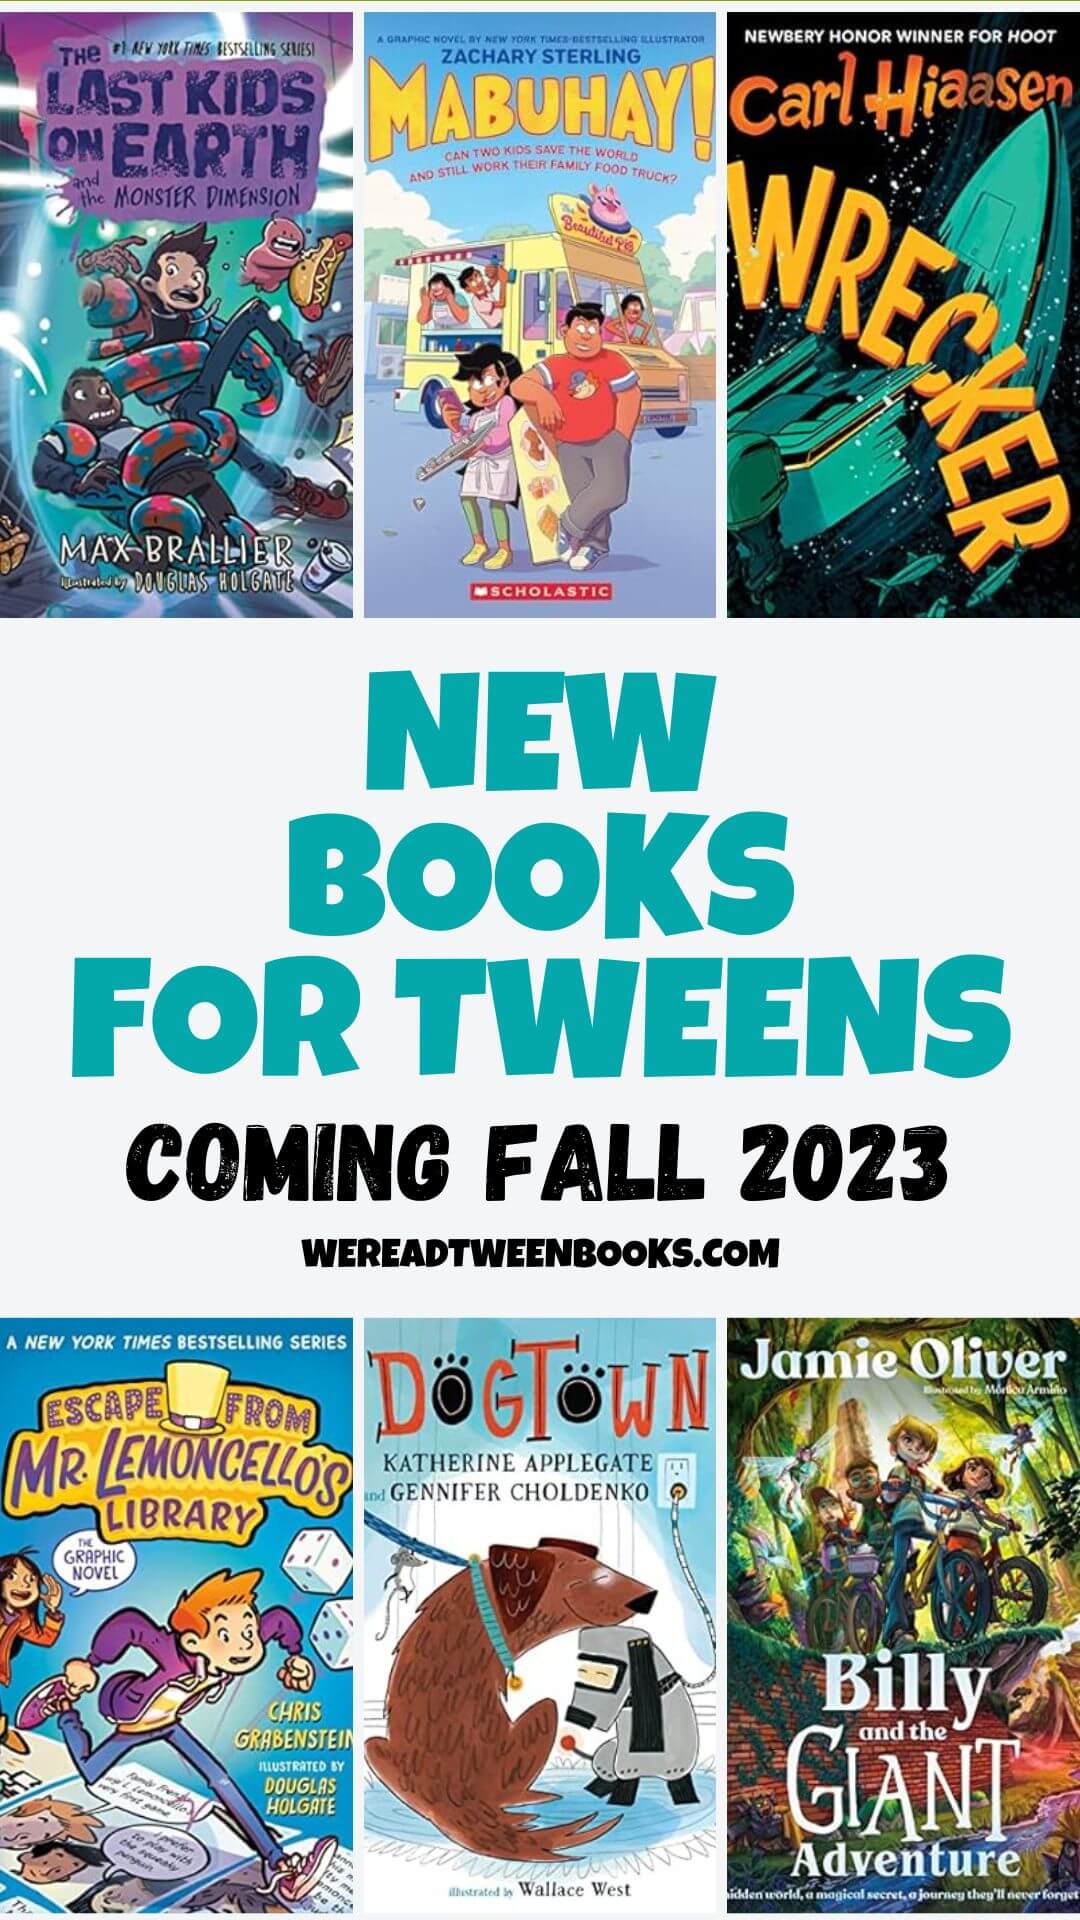 Check out all the new chapter books and graphic novels for tweens and kids coming fall 2023 on this epic list from We Read Tween Books.